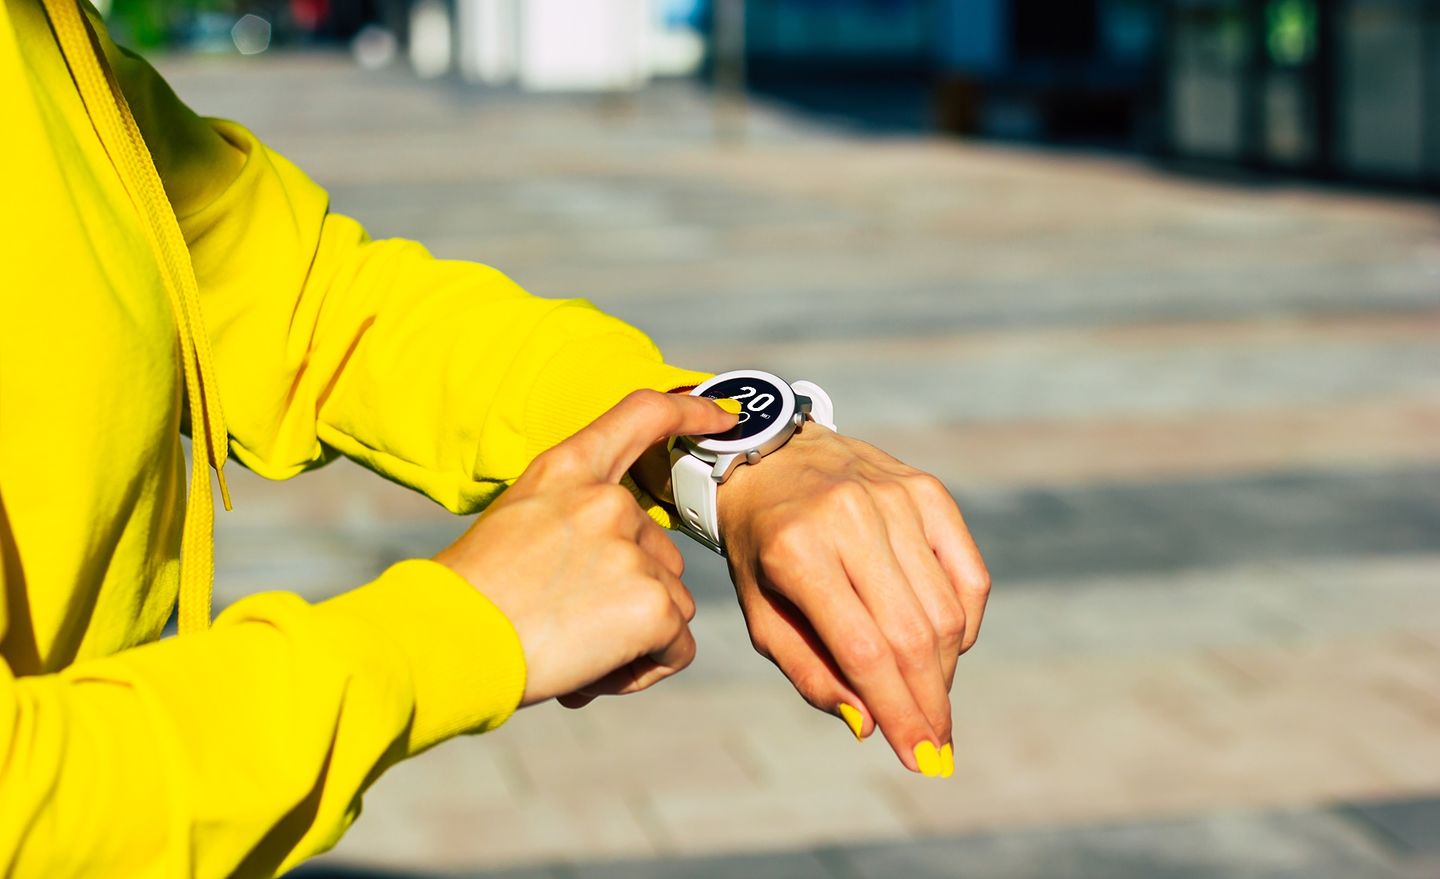 A student in a yellow sweatshirt points to the smartwatch on her left wrist with her right index finger. The Smartwatch shows a date. Photo: © Povozniuk/Getty Images/iStockphoto